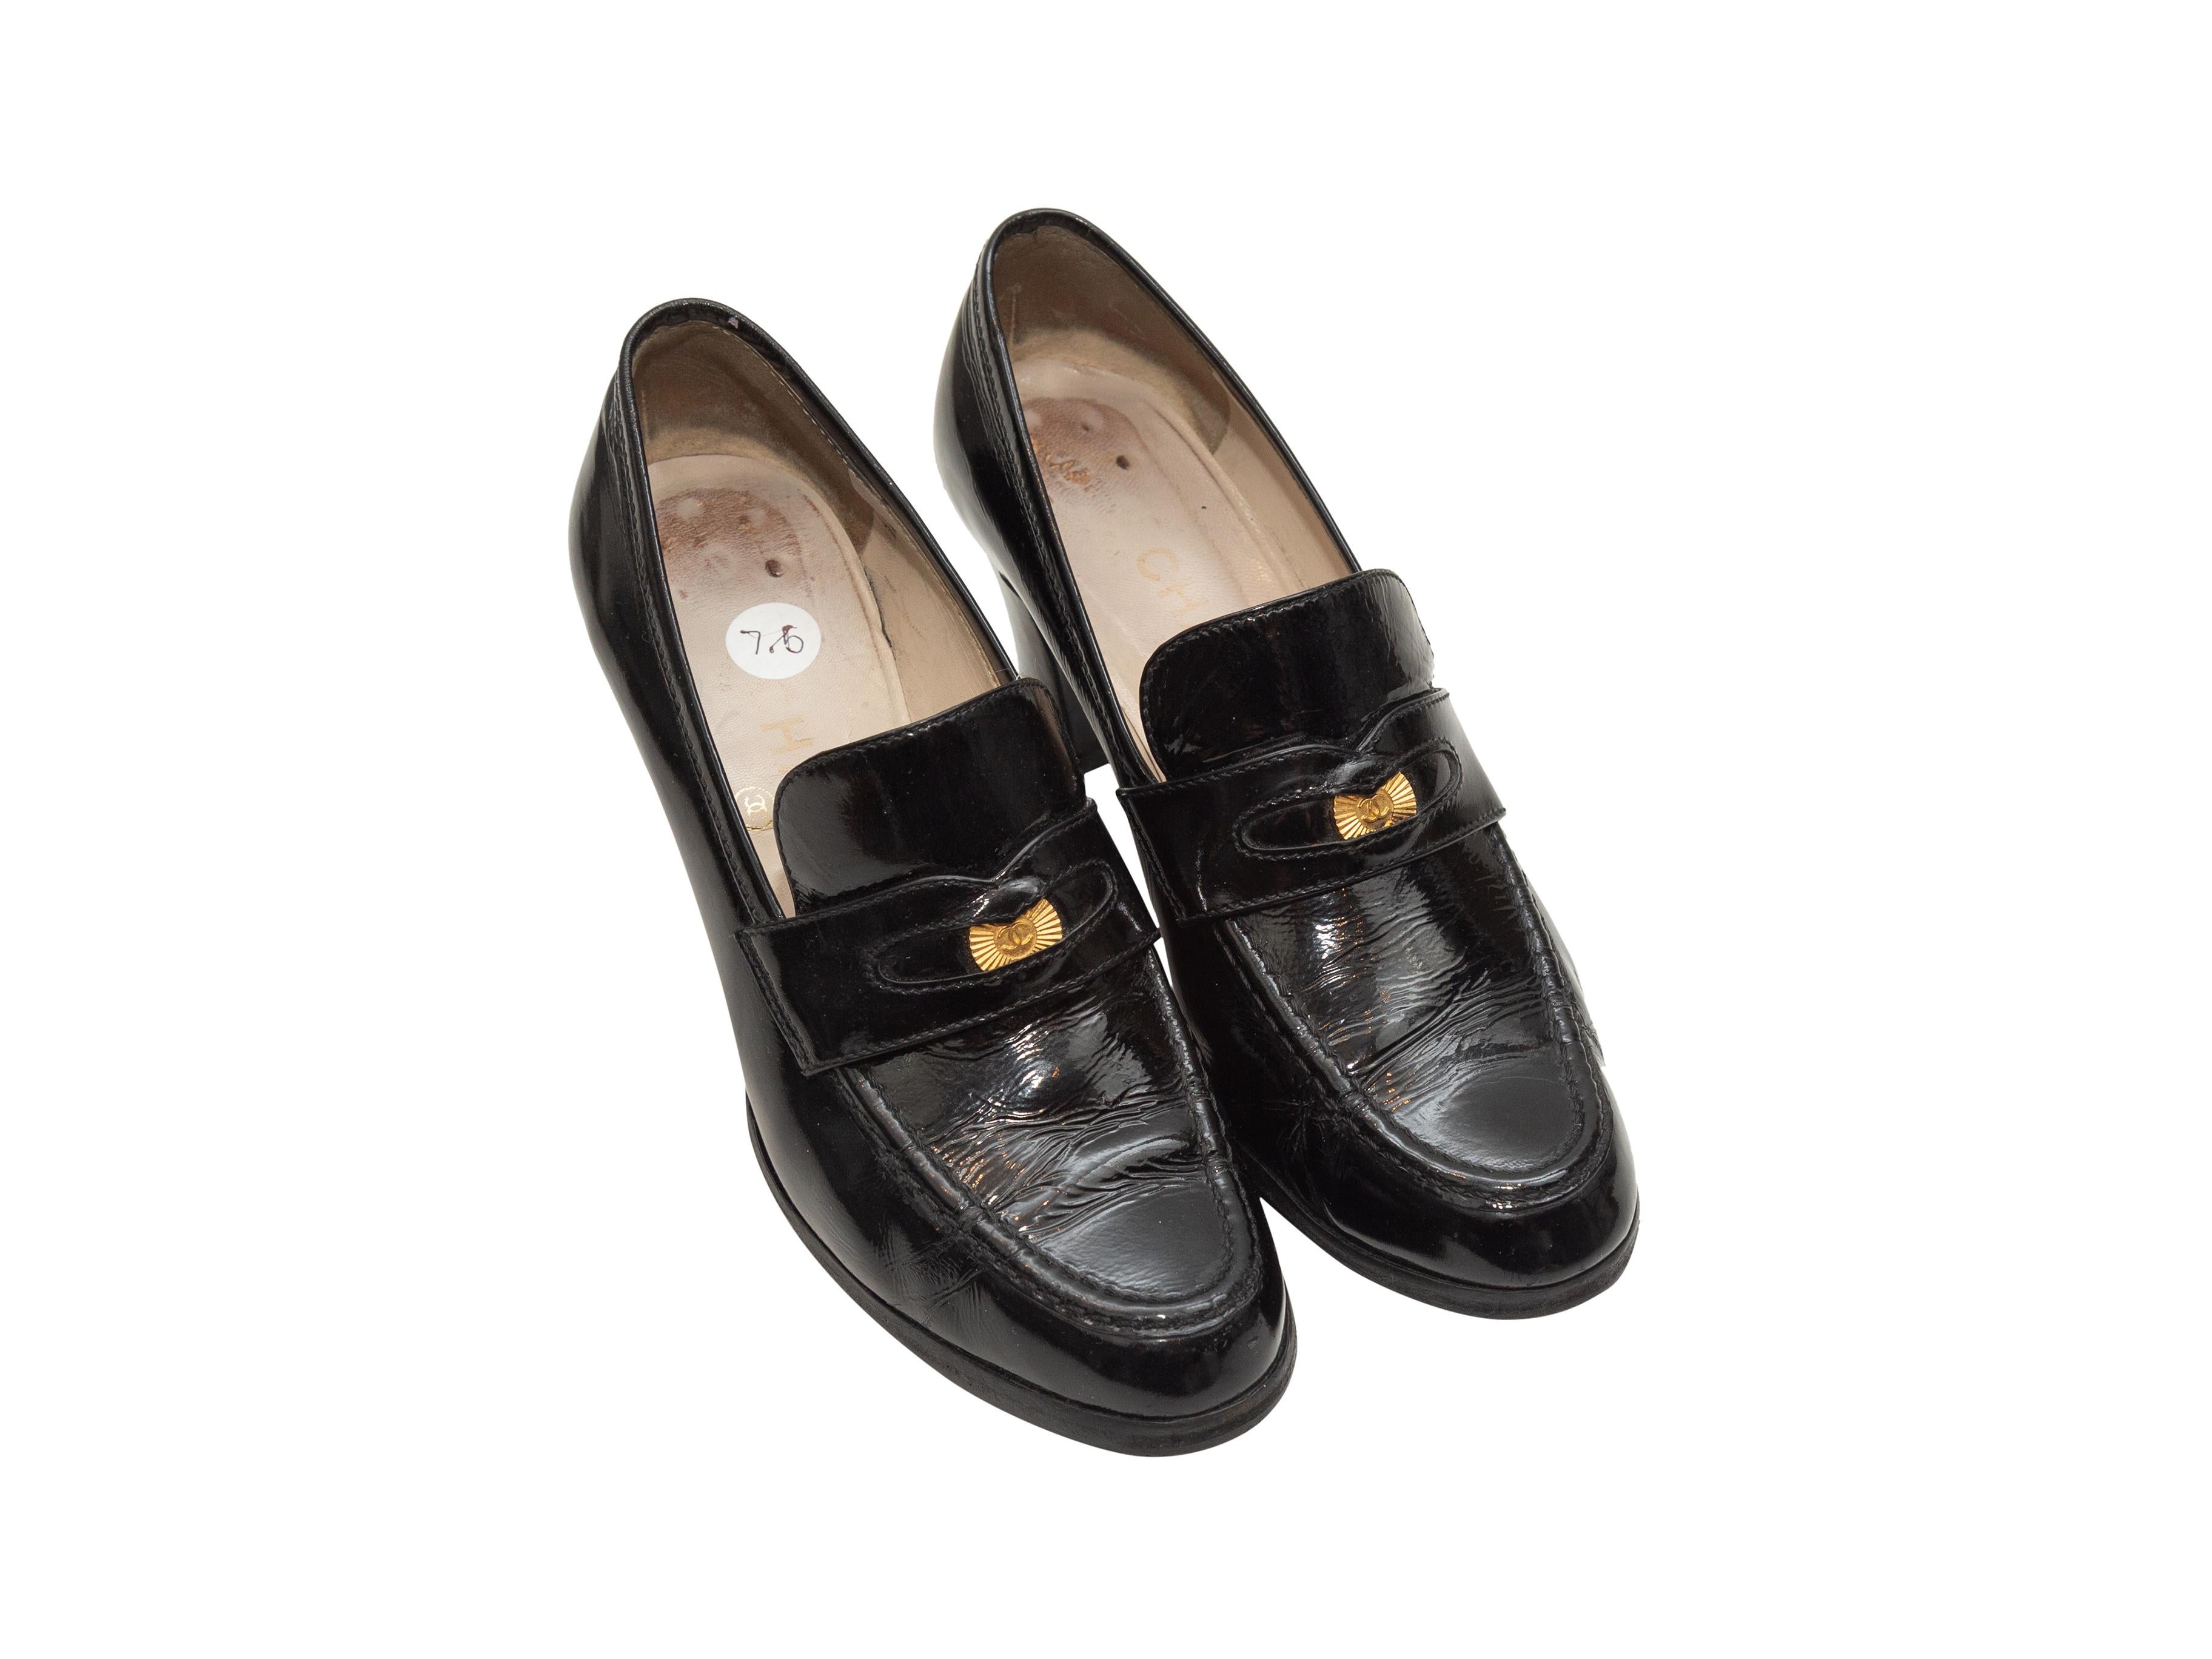 Product details: Vintage black patent leather heeled penny loafers by Chanel. Gold-tone metal CC accents at tops. Designer size 37.5. 2.5